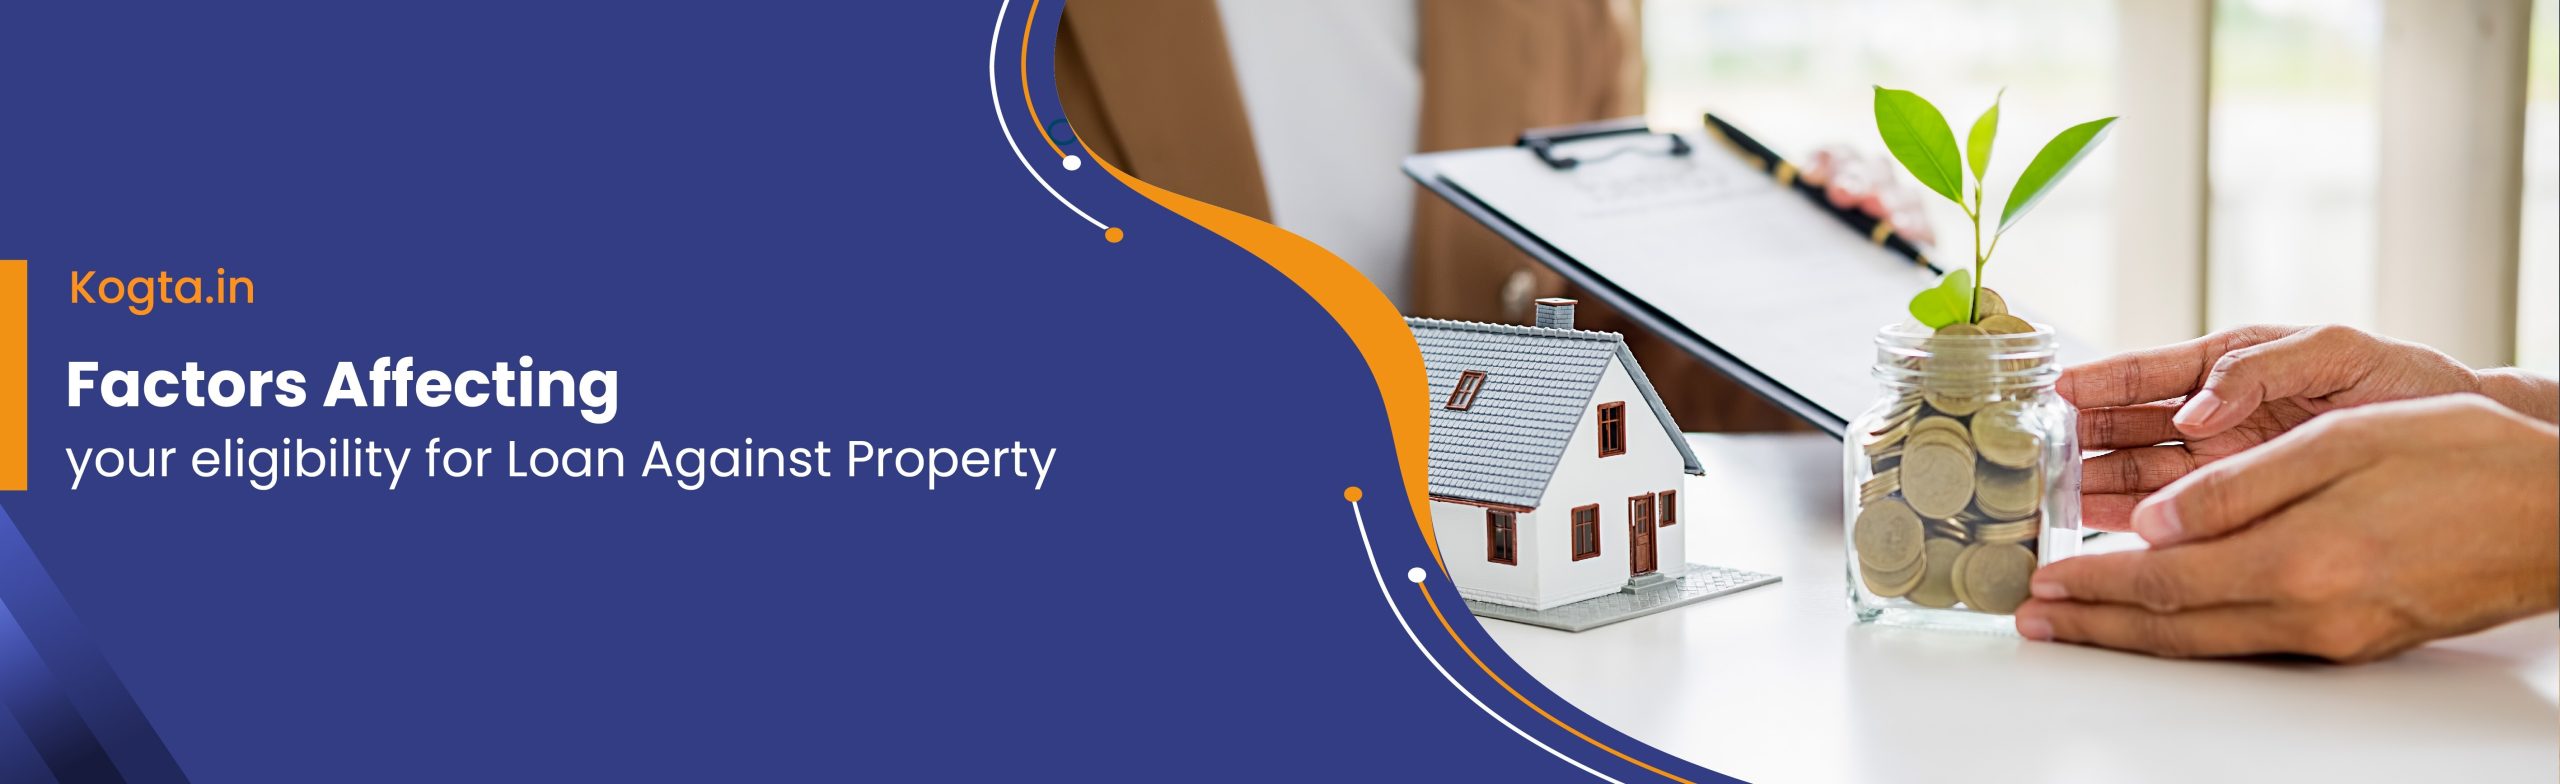 Factors Affecting your eligibility for Loan Against Property